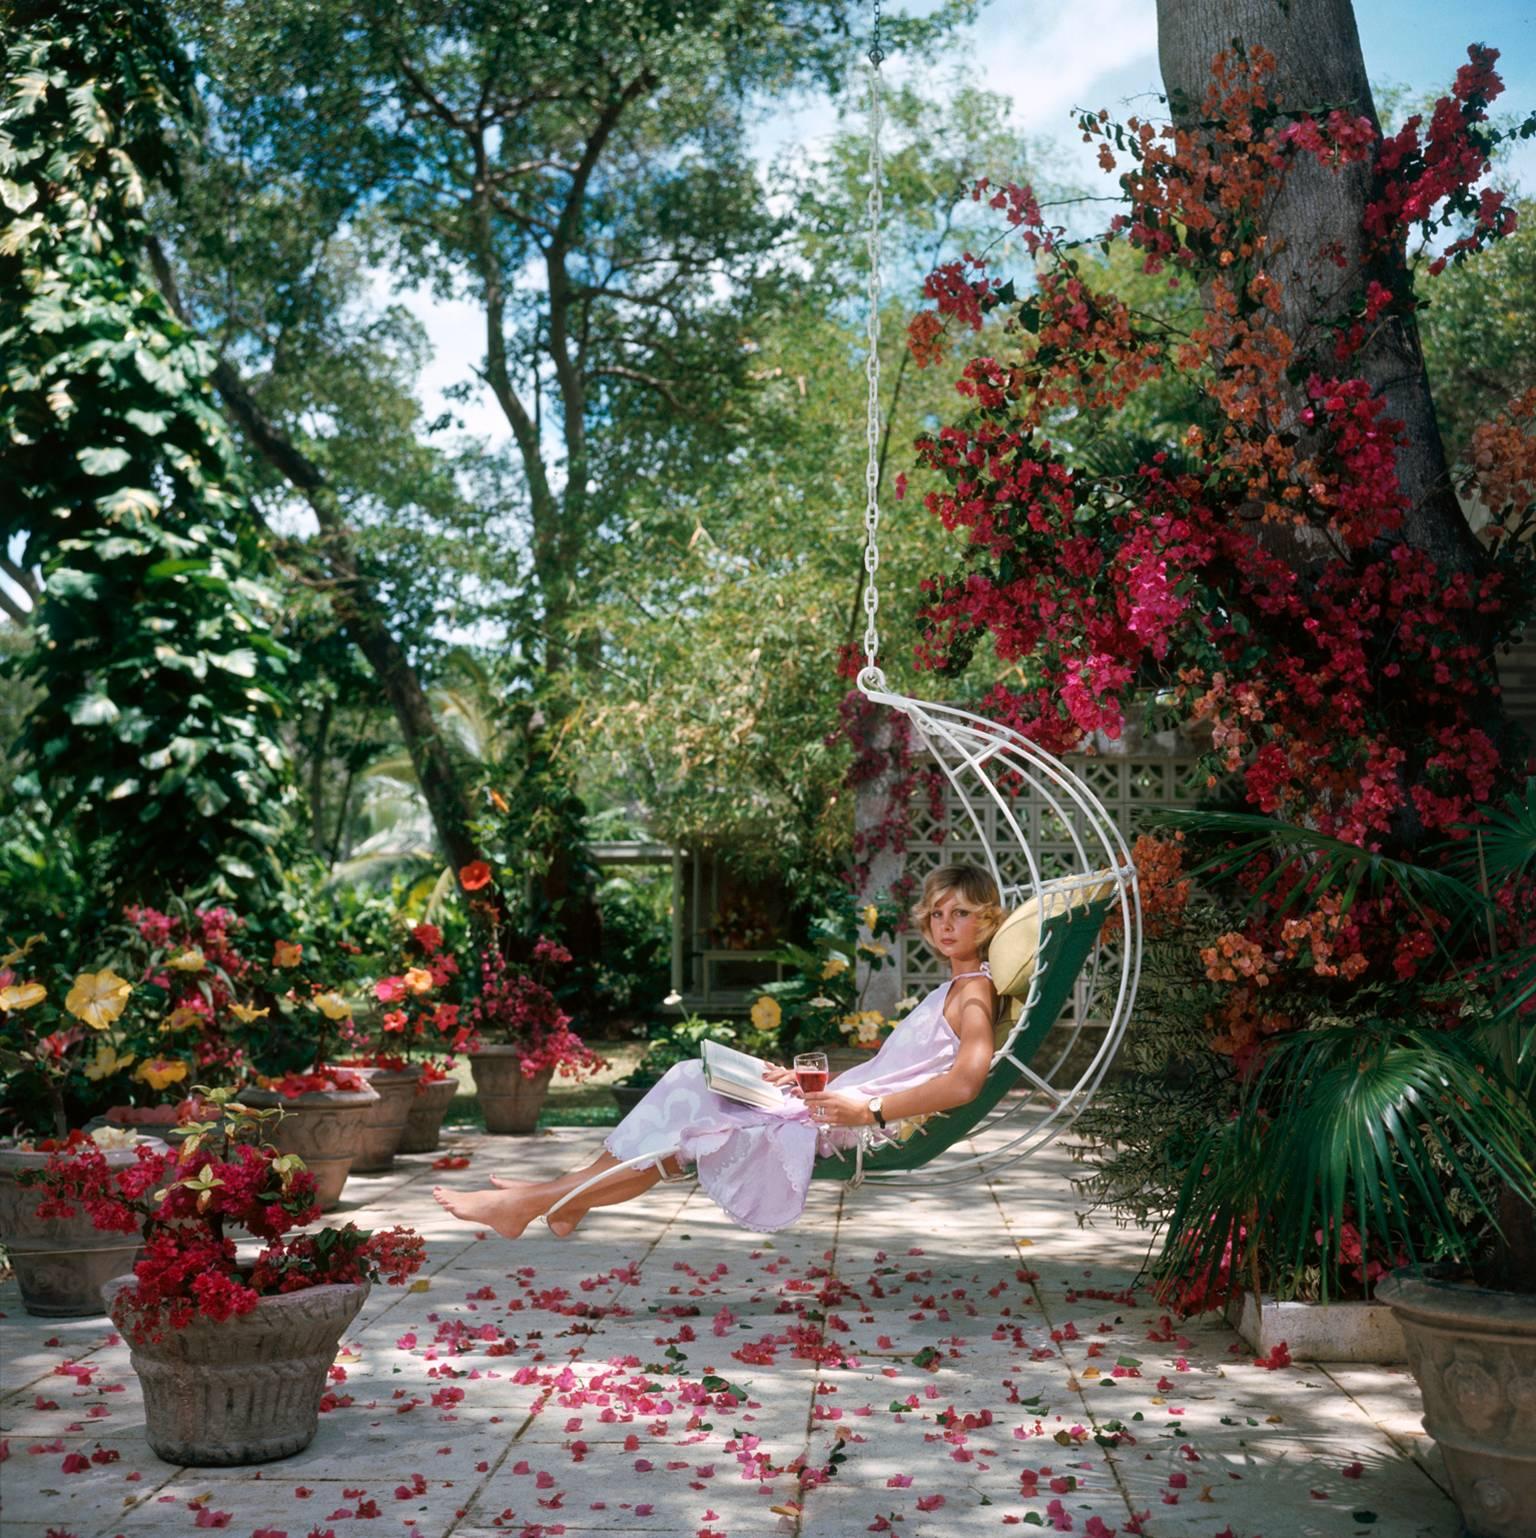 Barbados Bliss by Slim Aarons

Ava Marshall relaxes with a book amongst the bougainvillea in Barbados, April 1976. 

Another typically 'Slim' photograph, this one epitomises the elegant, vintage style and glamour of the period's wealthy and famous,